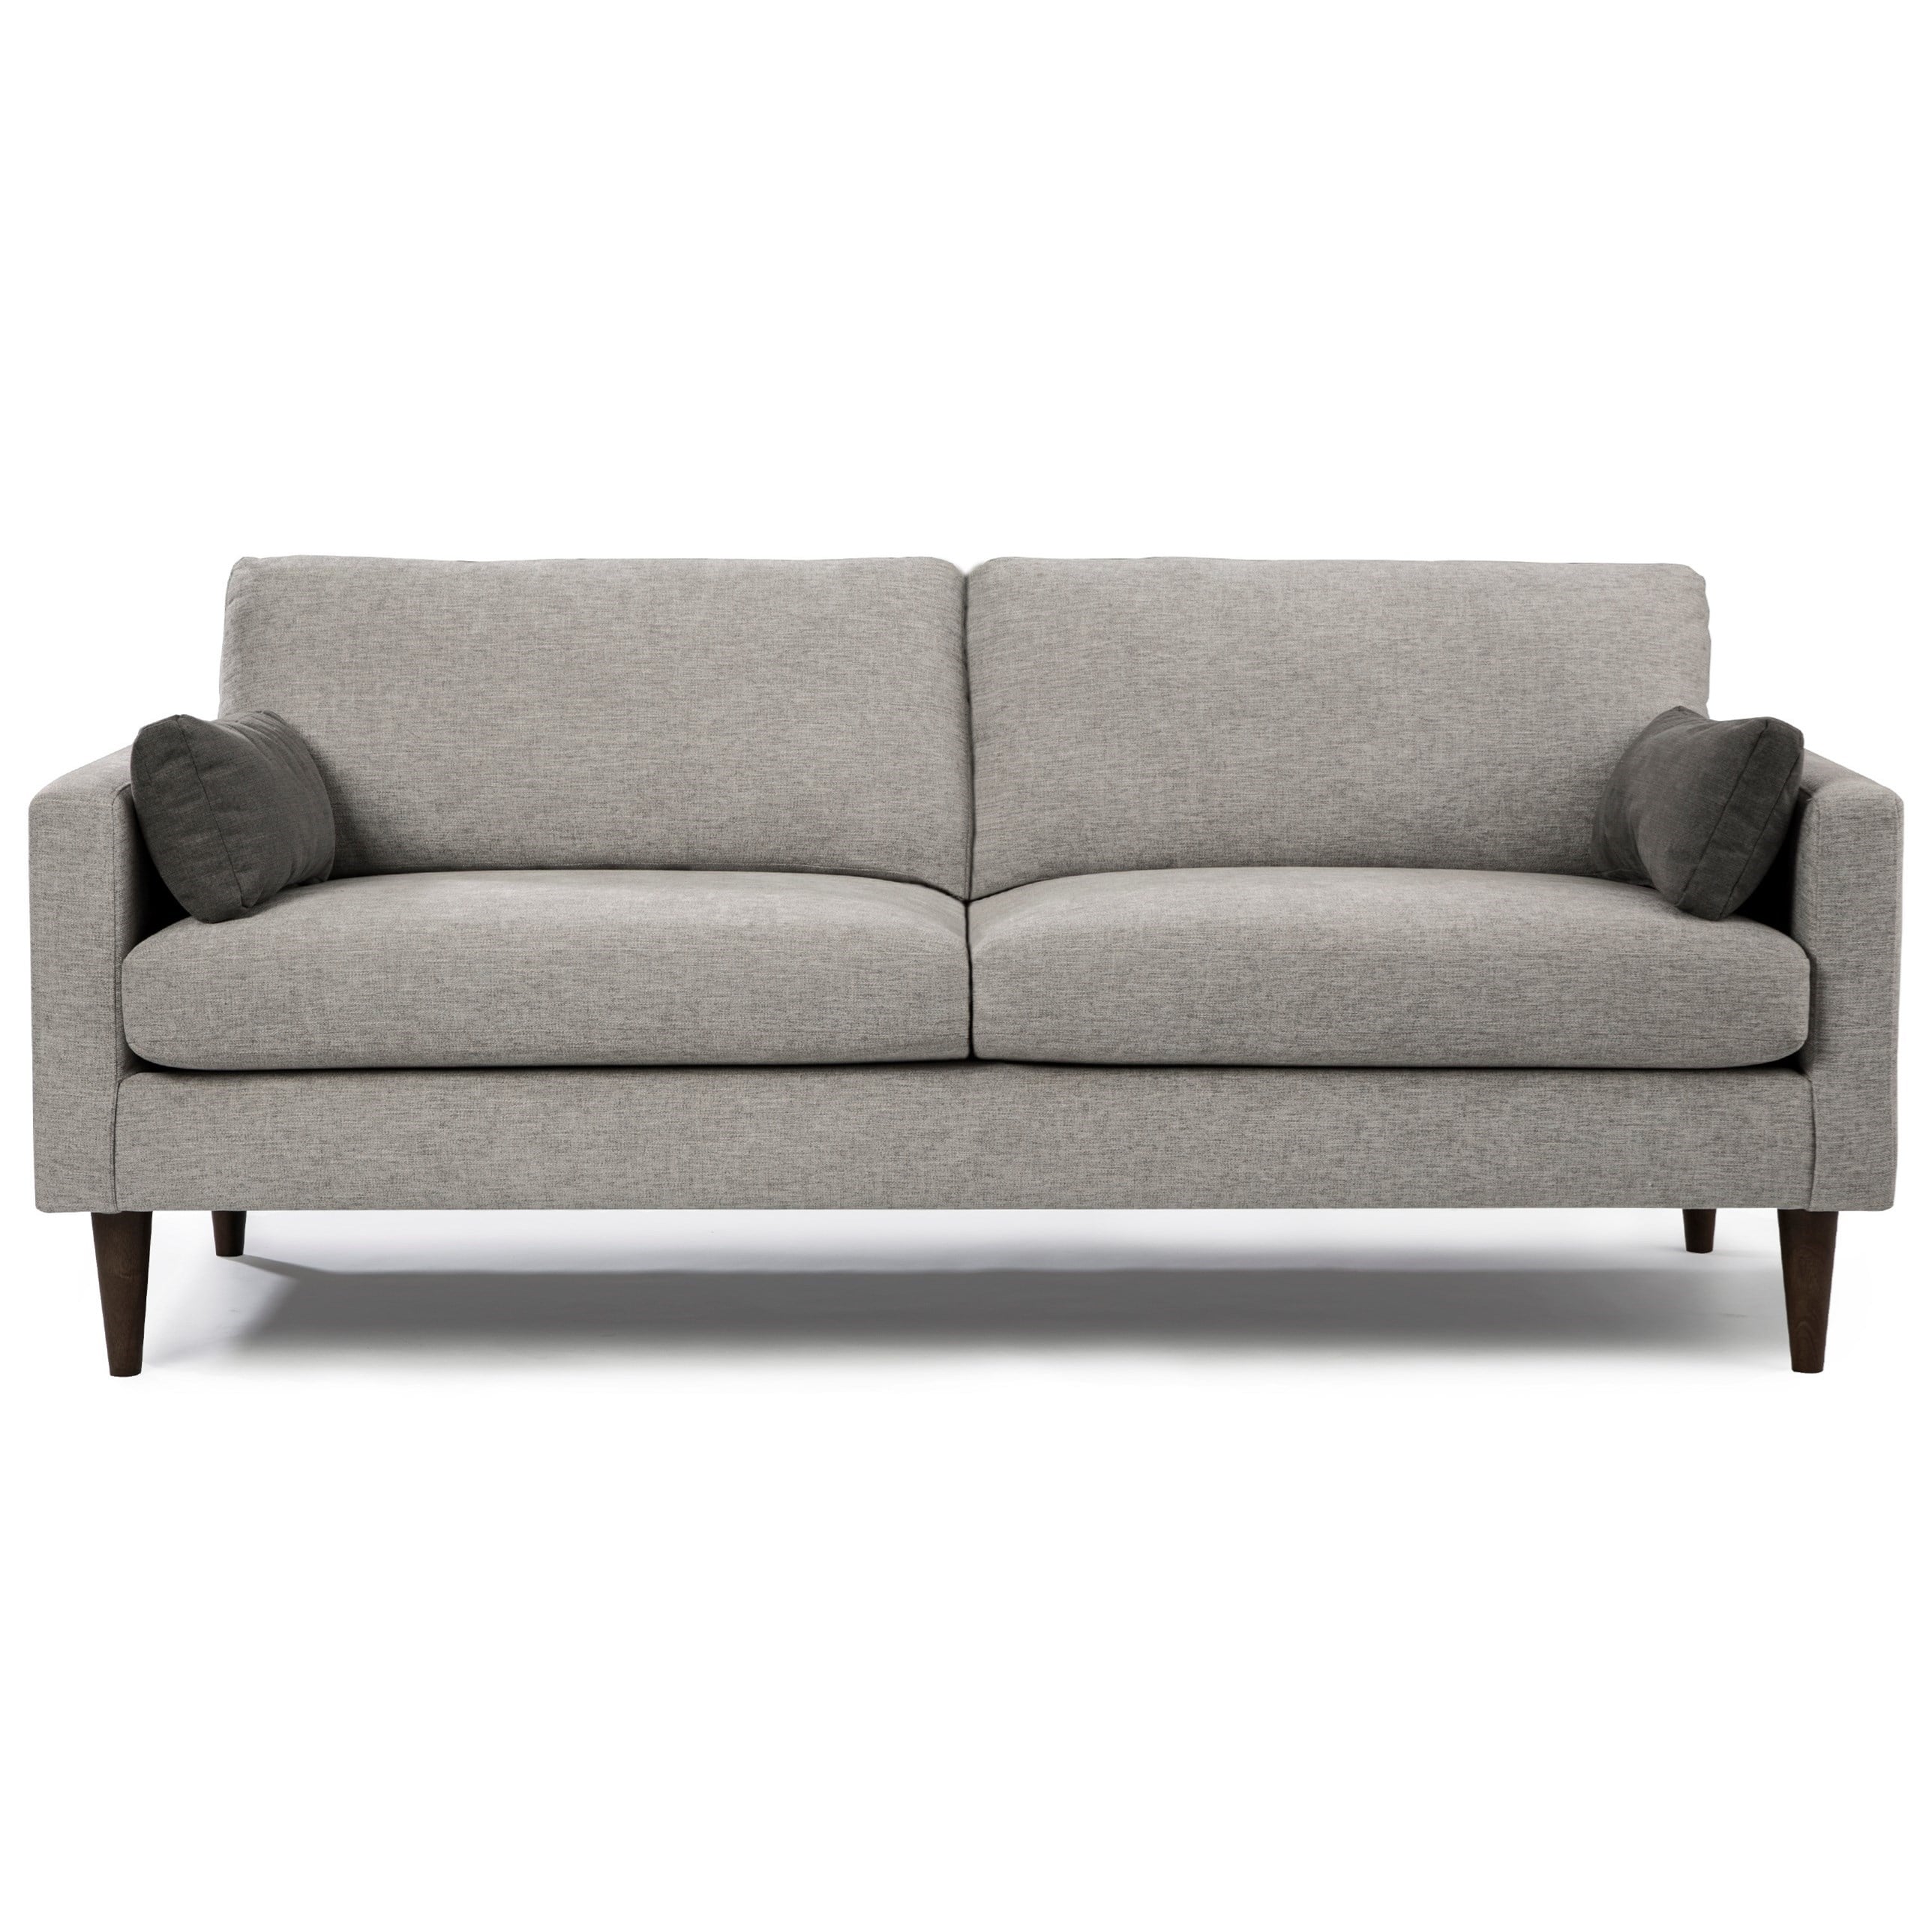 Best Home Furnishings Trafton Contemporary Small Scale Sofa | A1 